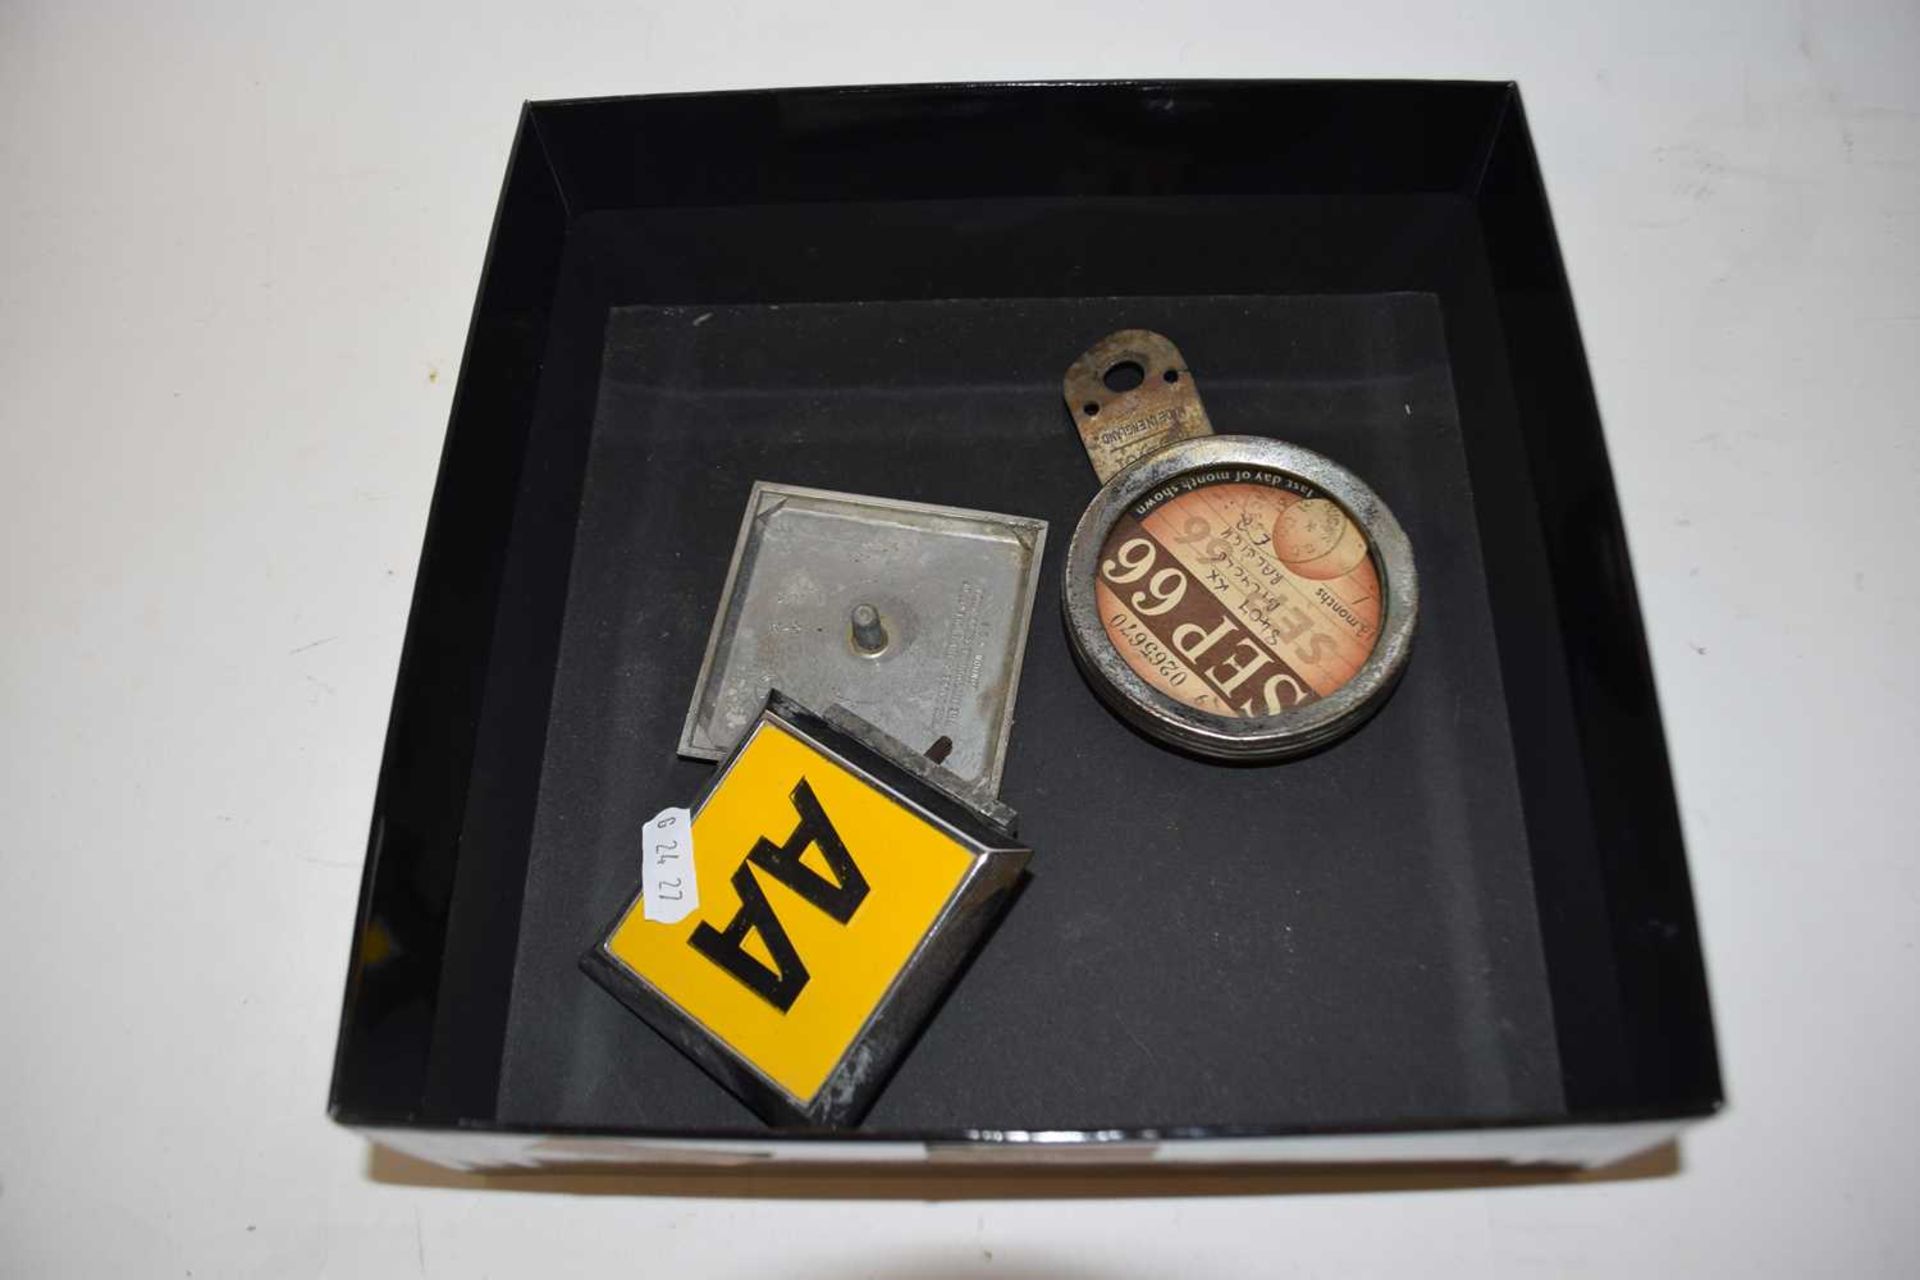 Two vintage AA badges and a cap disc holder (3)